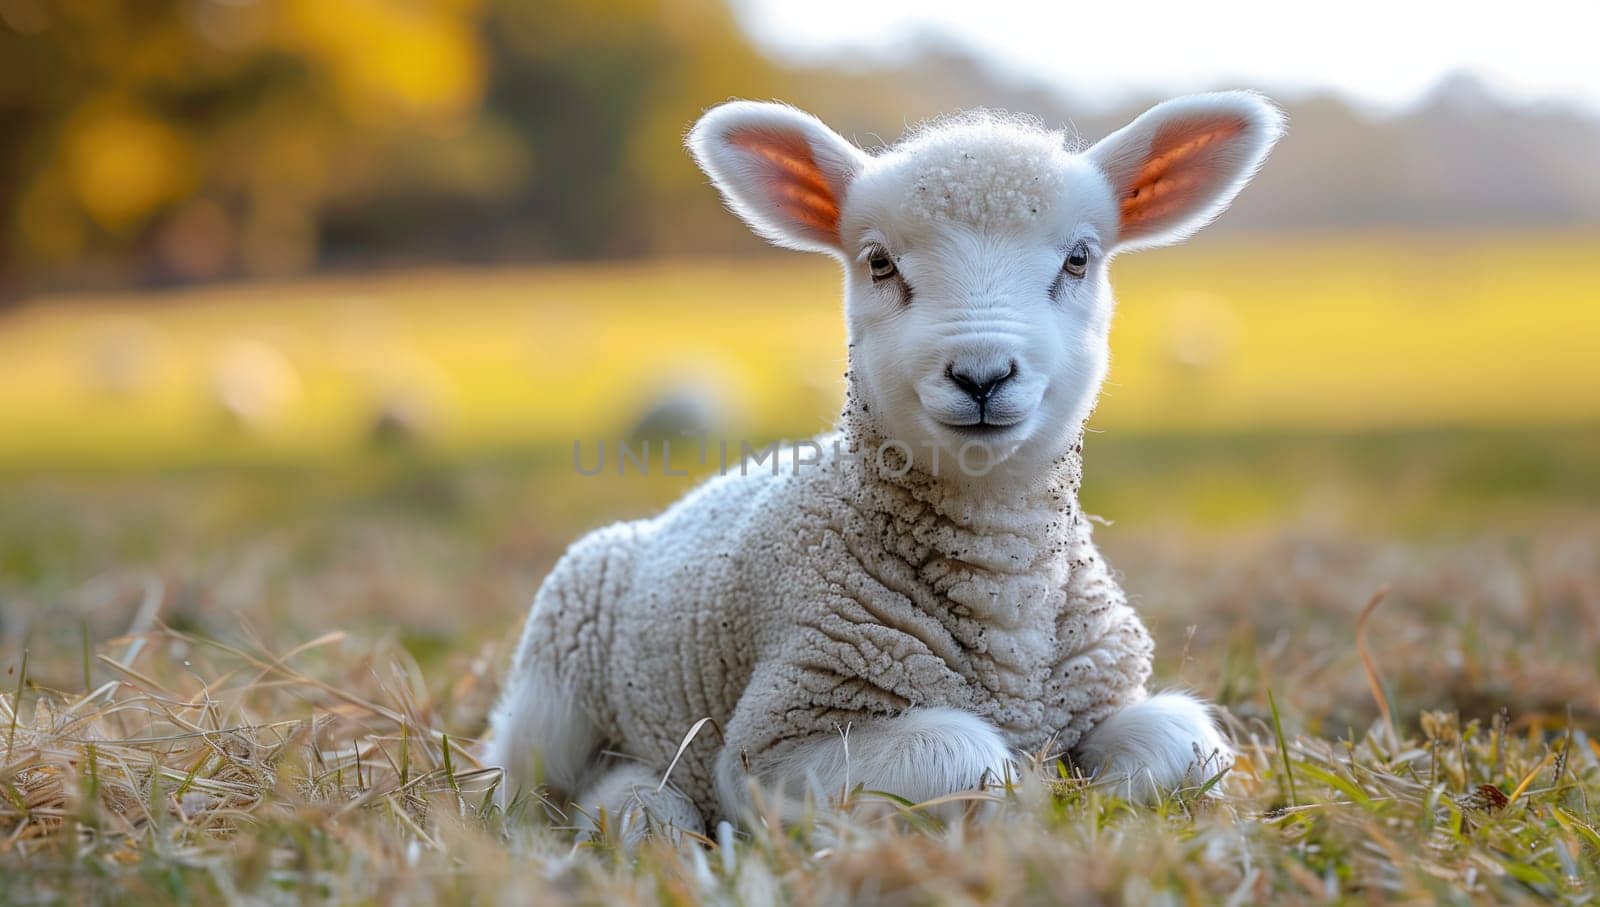 A lamb is peacefully resting in the grassy natural landscape, gazing at the camera with its adorable snout. This terrestrial animal shows perfect adaptation to the grassland environment